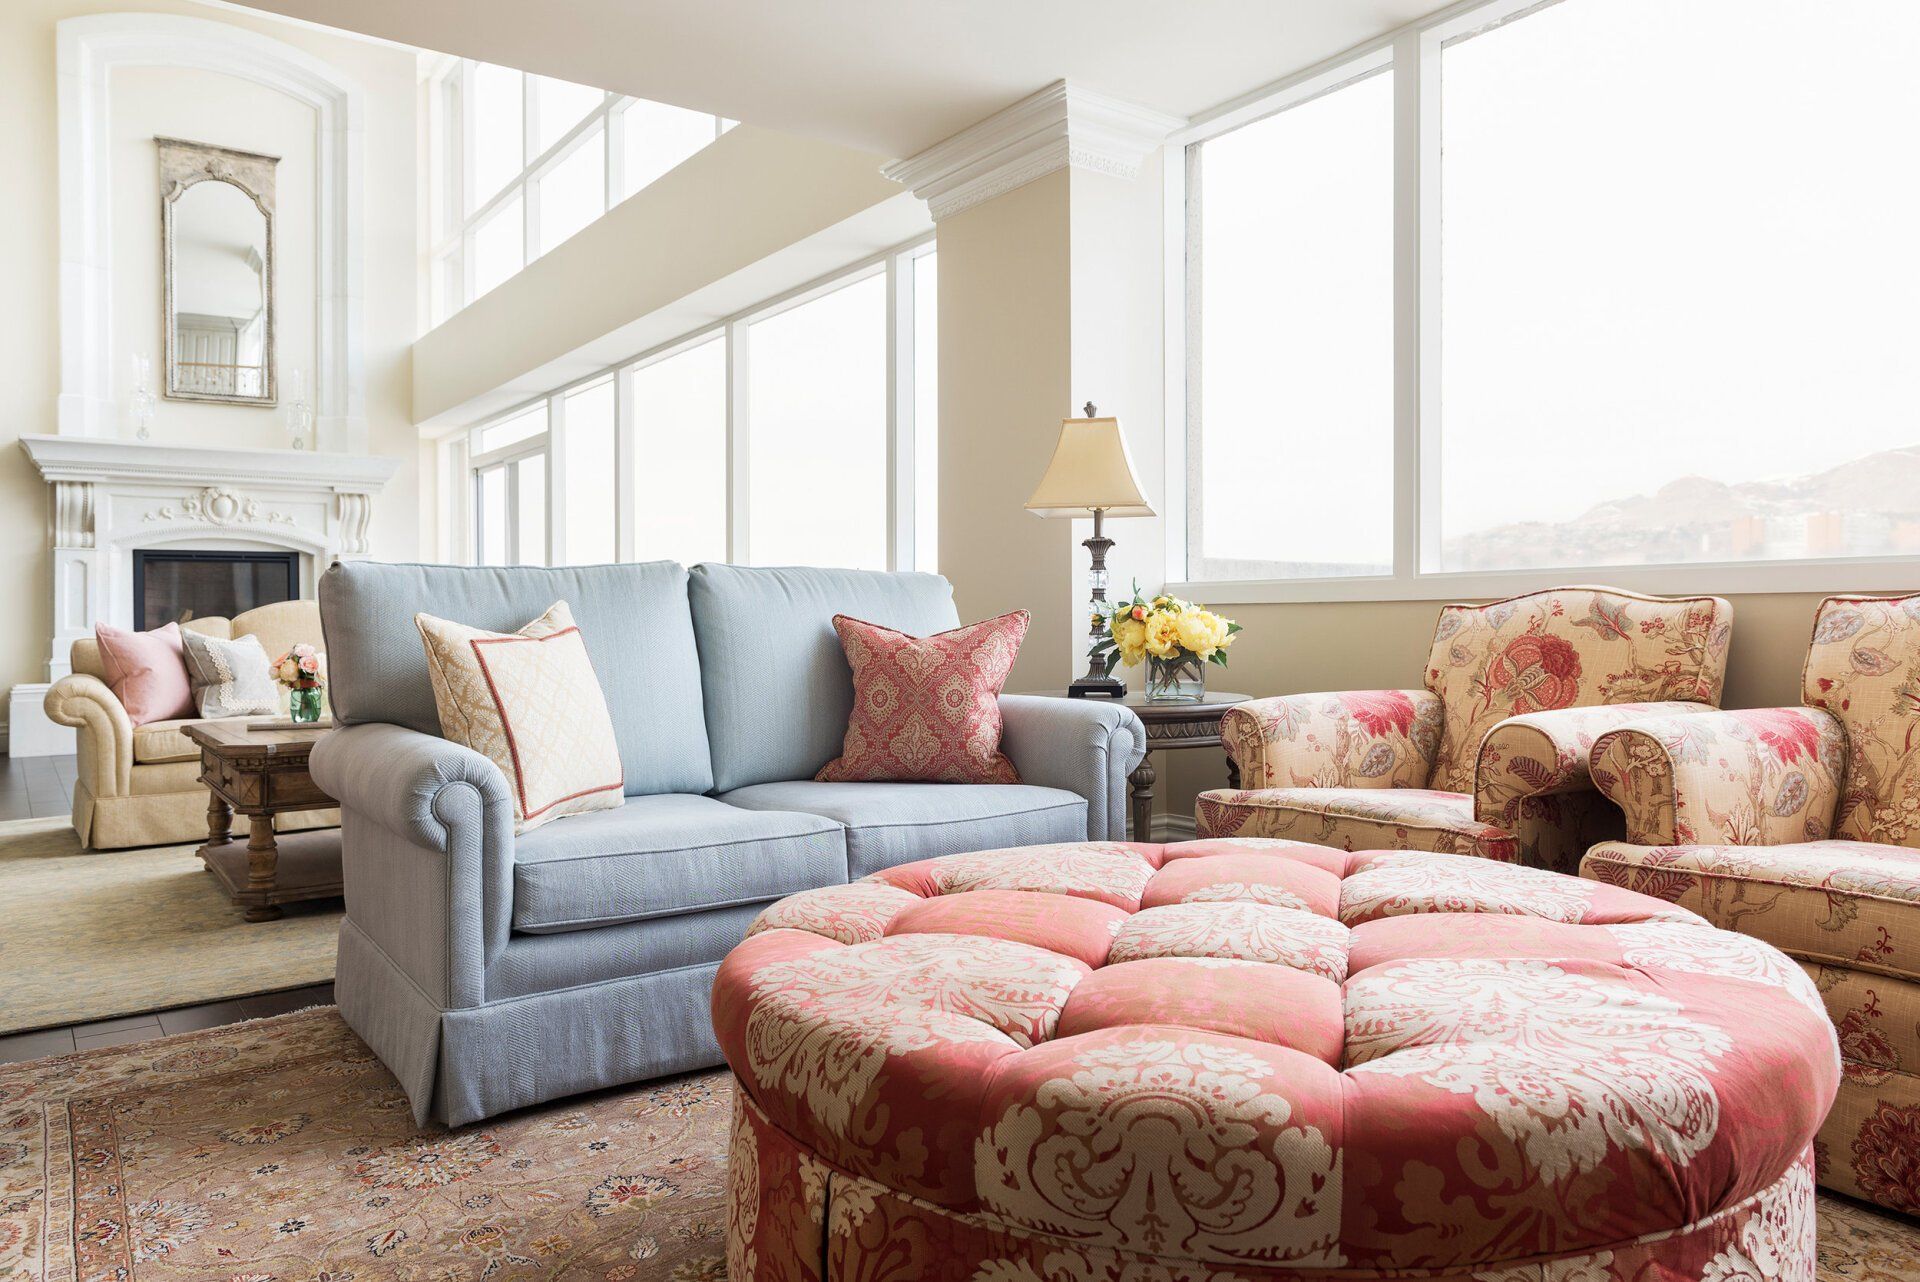 Furniture Upholstery Services in Buffalo, NY